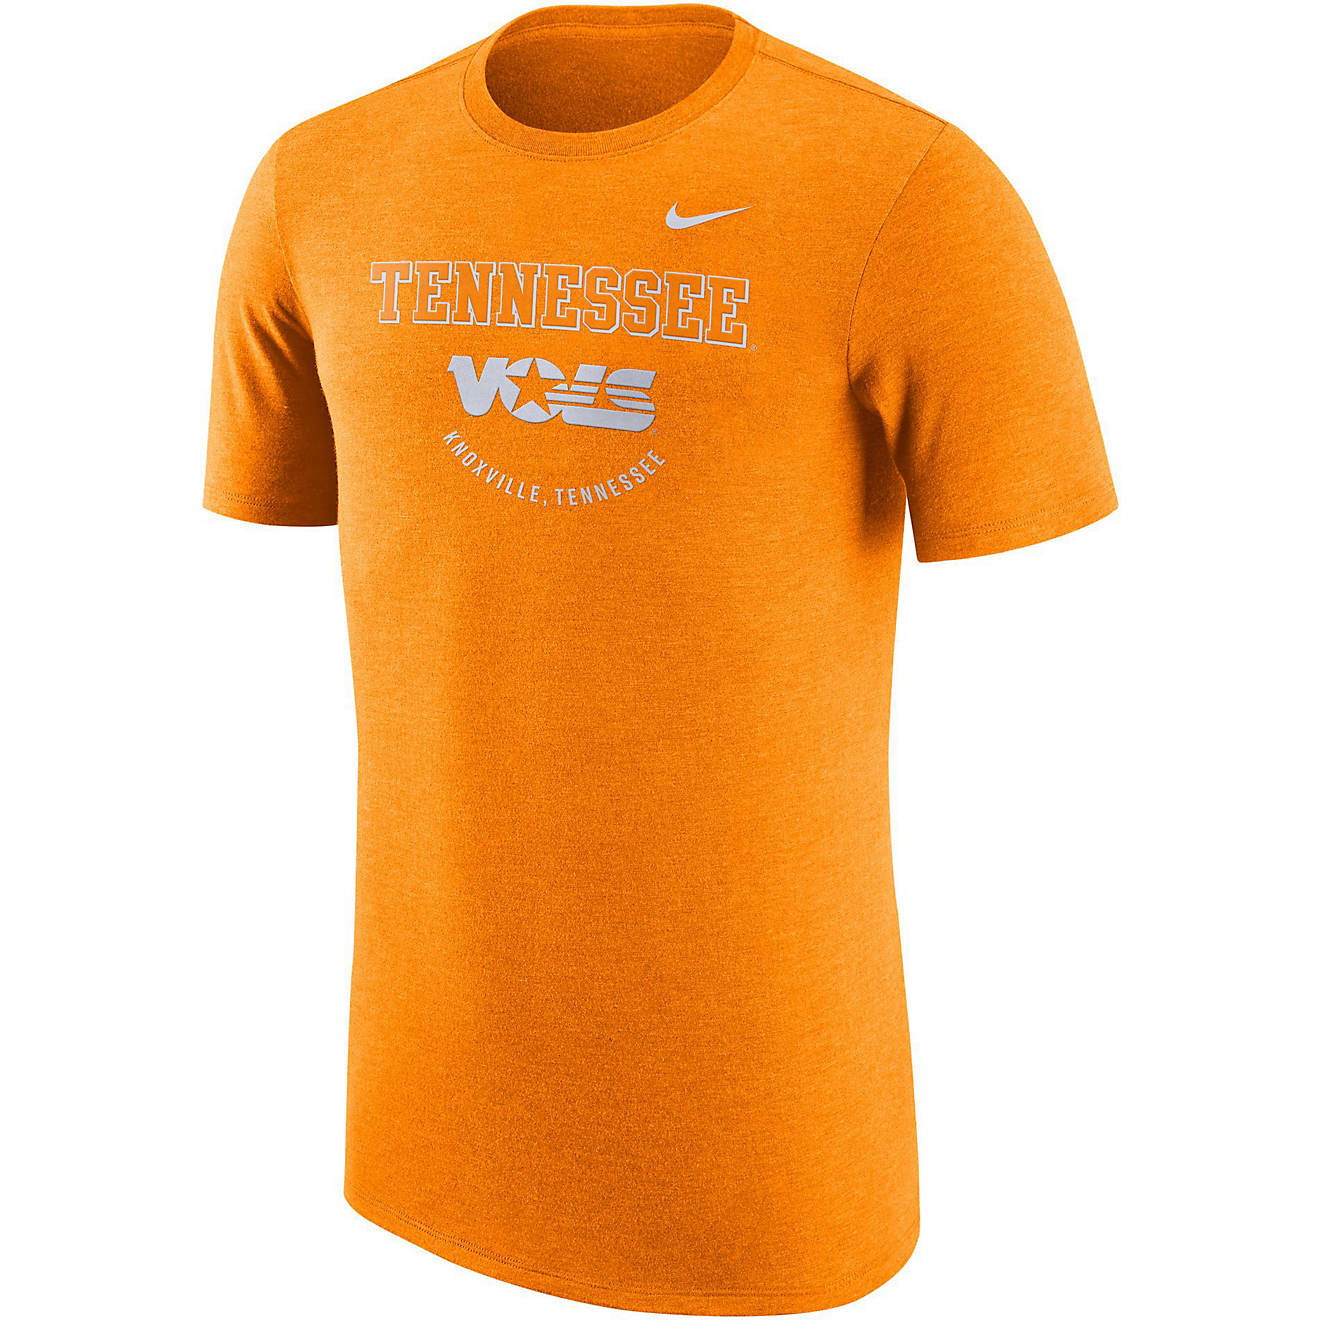 Nike Men's University of Tennessee Dri-FIT Triblend T-shirt | Academy